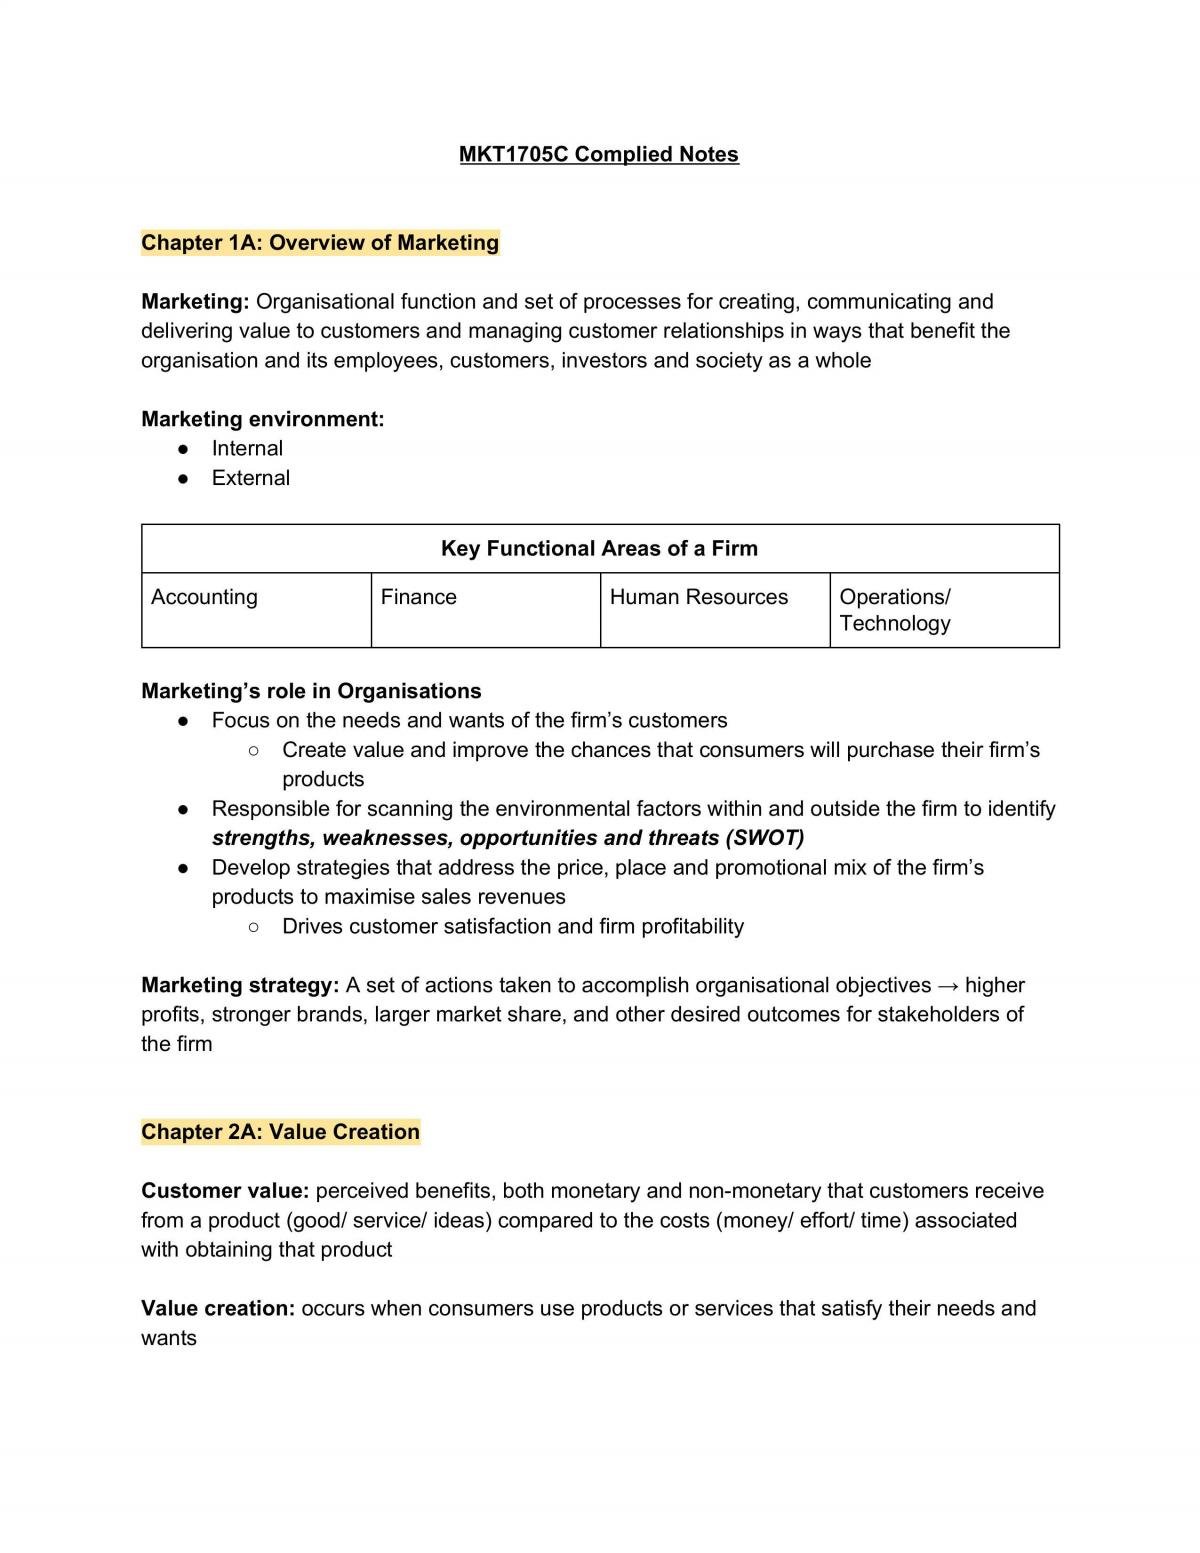 MKT1705 - Principles of Marketing complete notes - Page 1